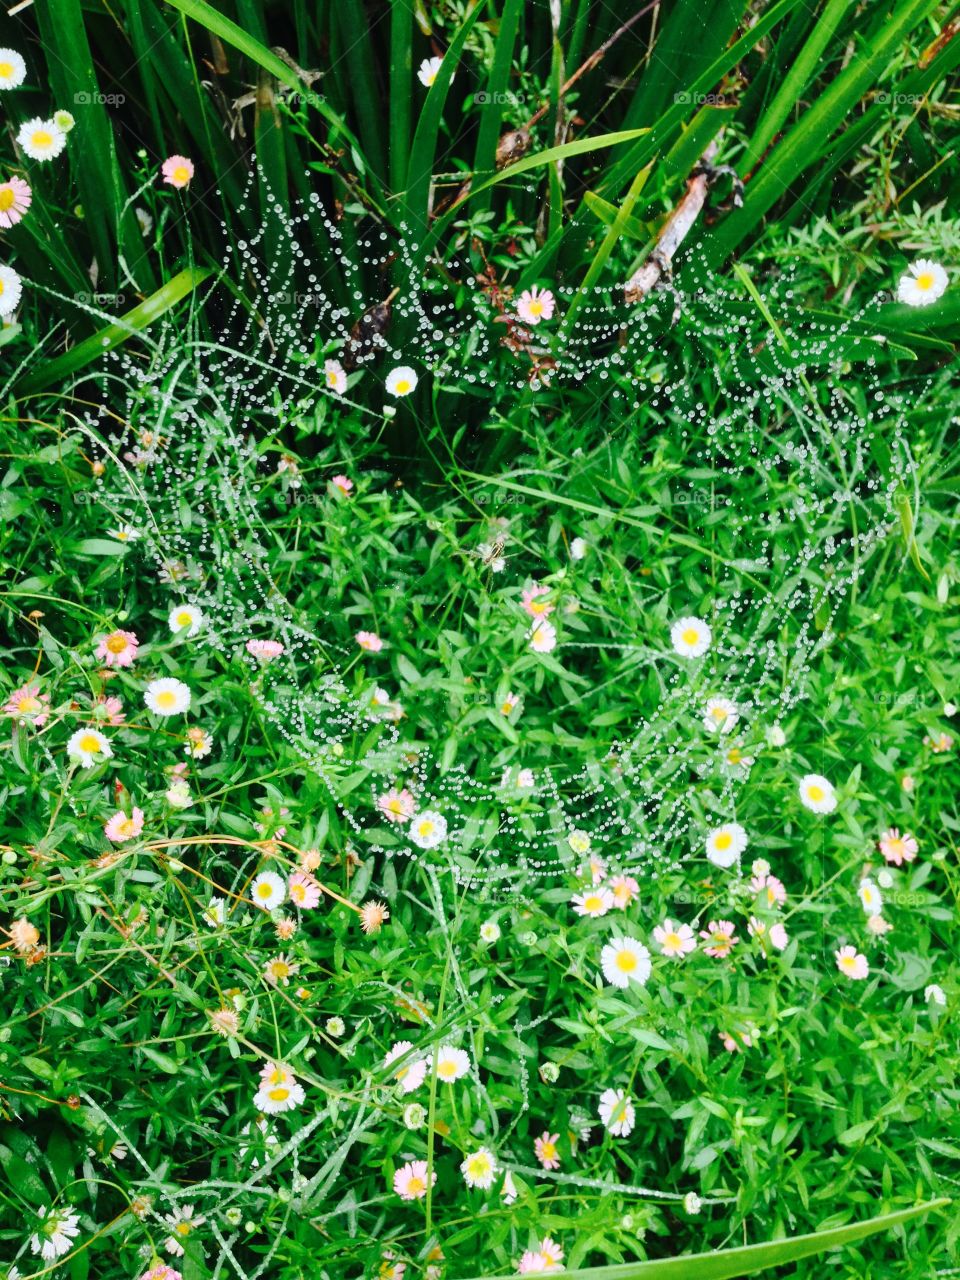 Heart shaped spiders web